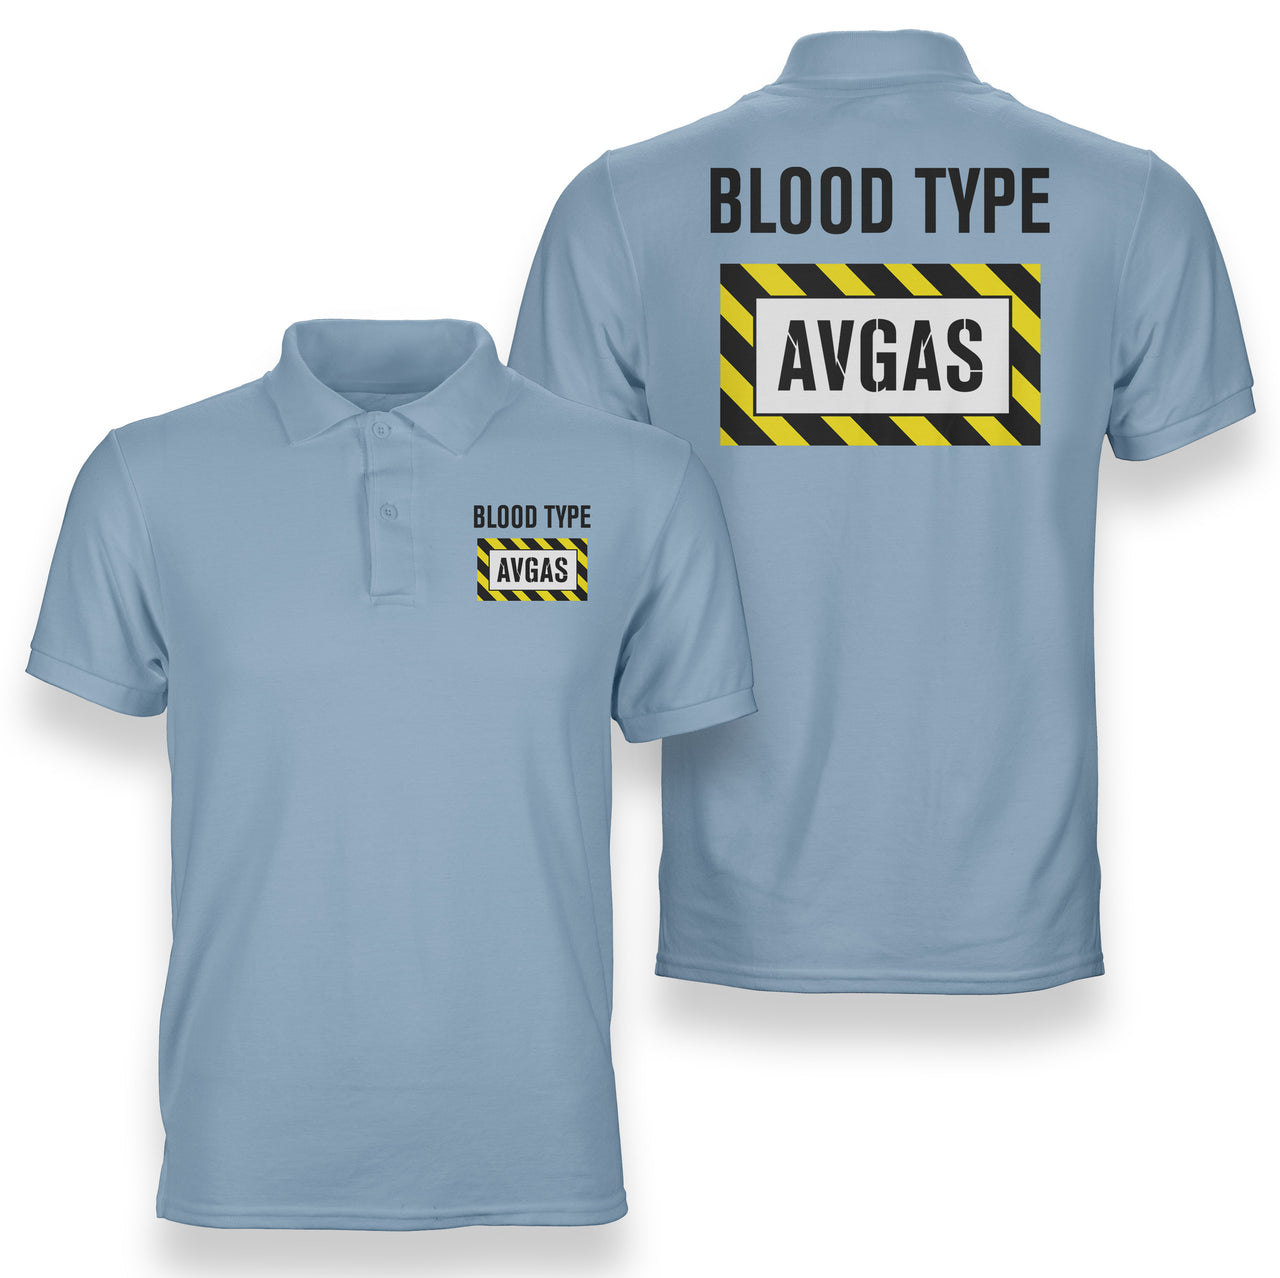 Blood Type AVGAS Designed Double Side Polo T-Shirts